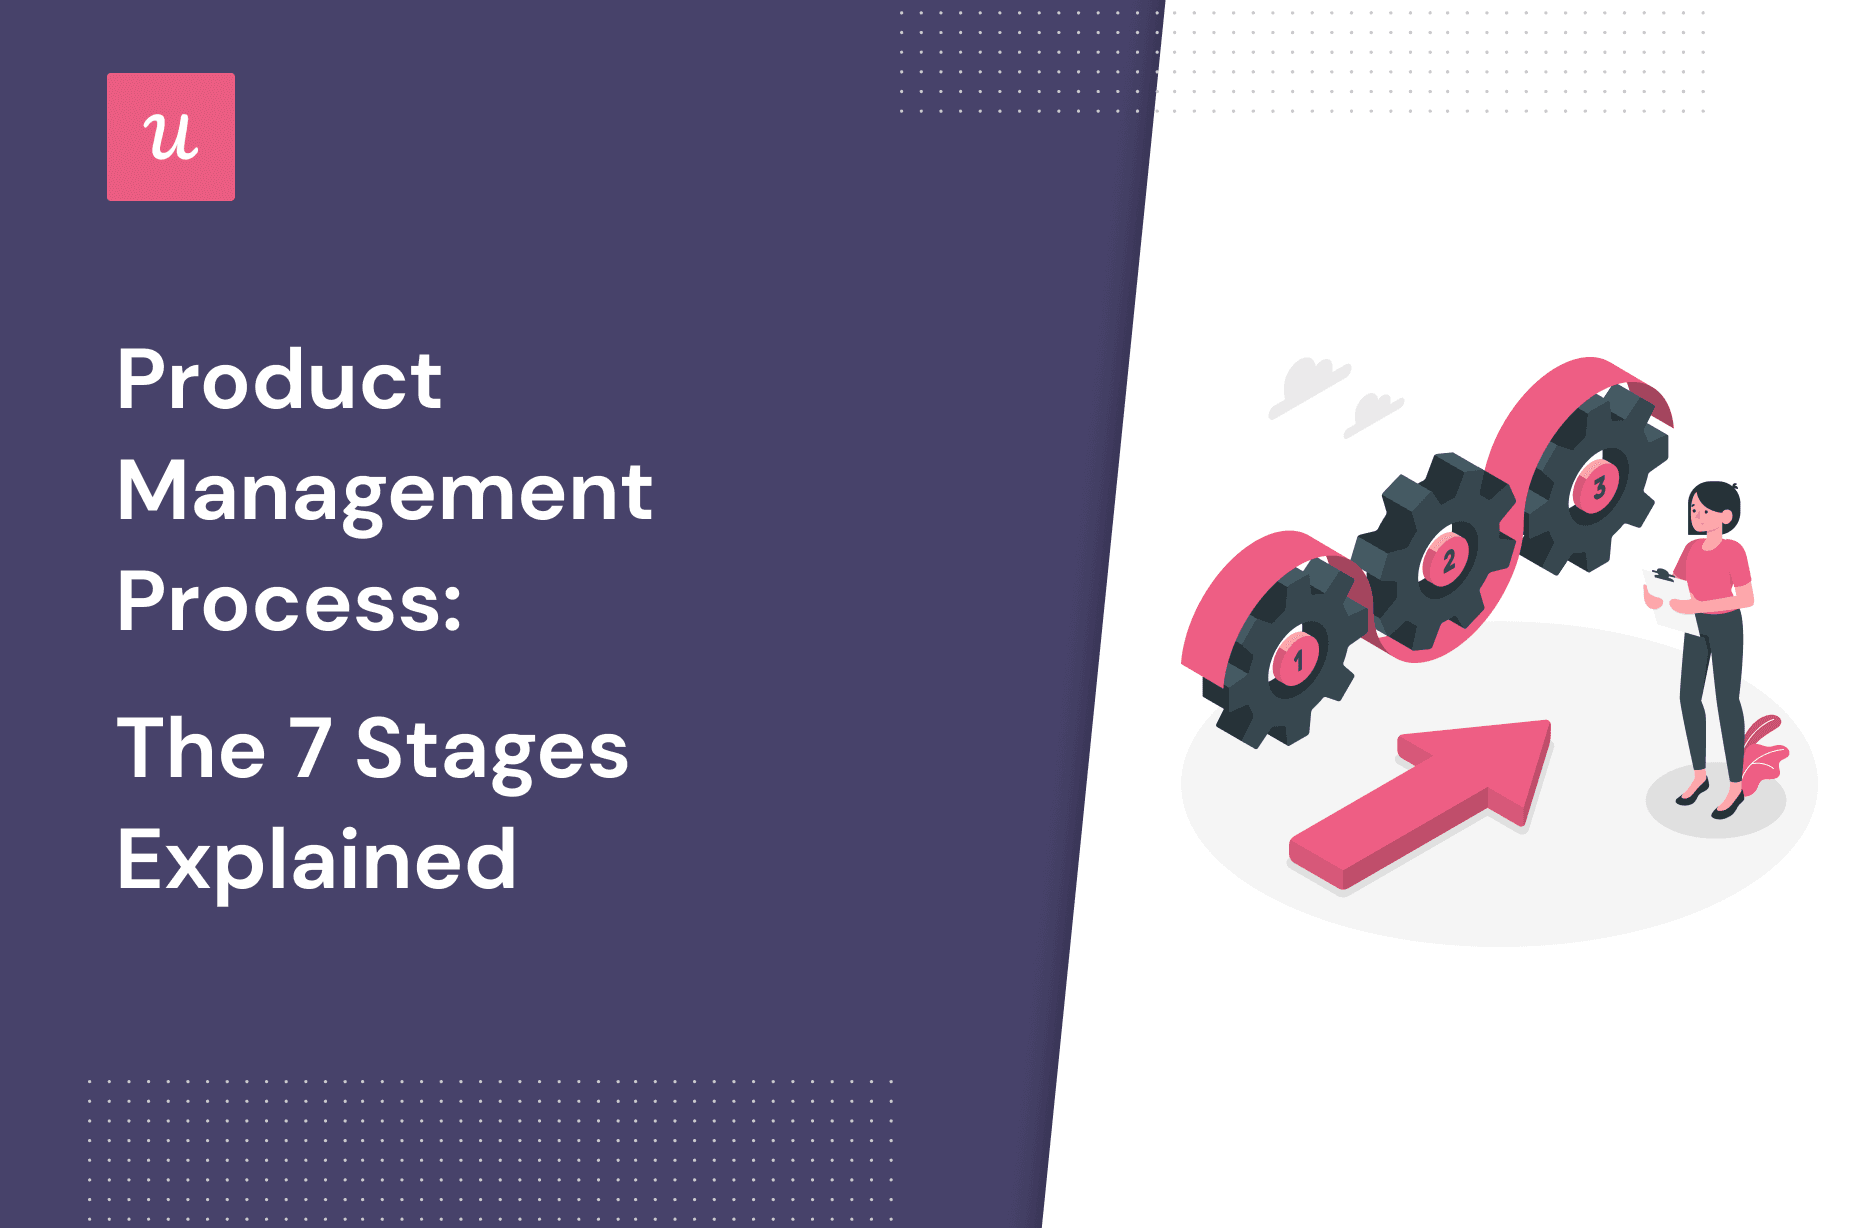 Product Management Process: The 7 Stages Explained